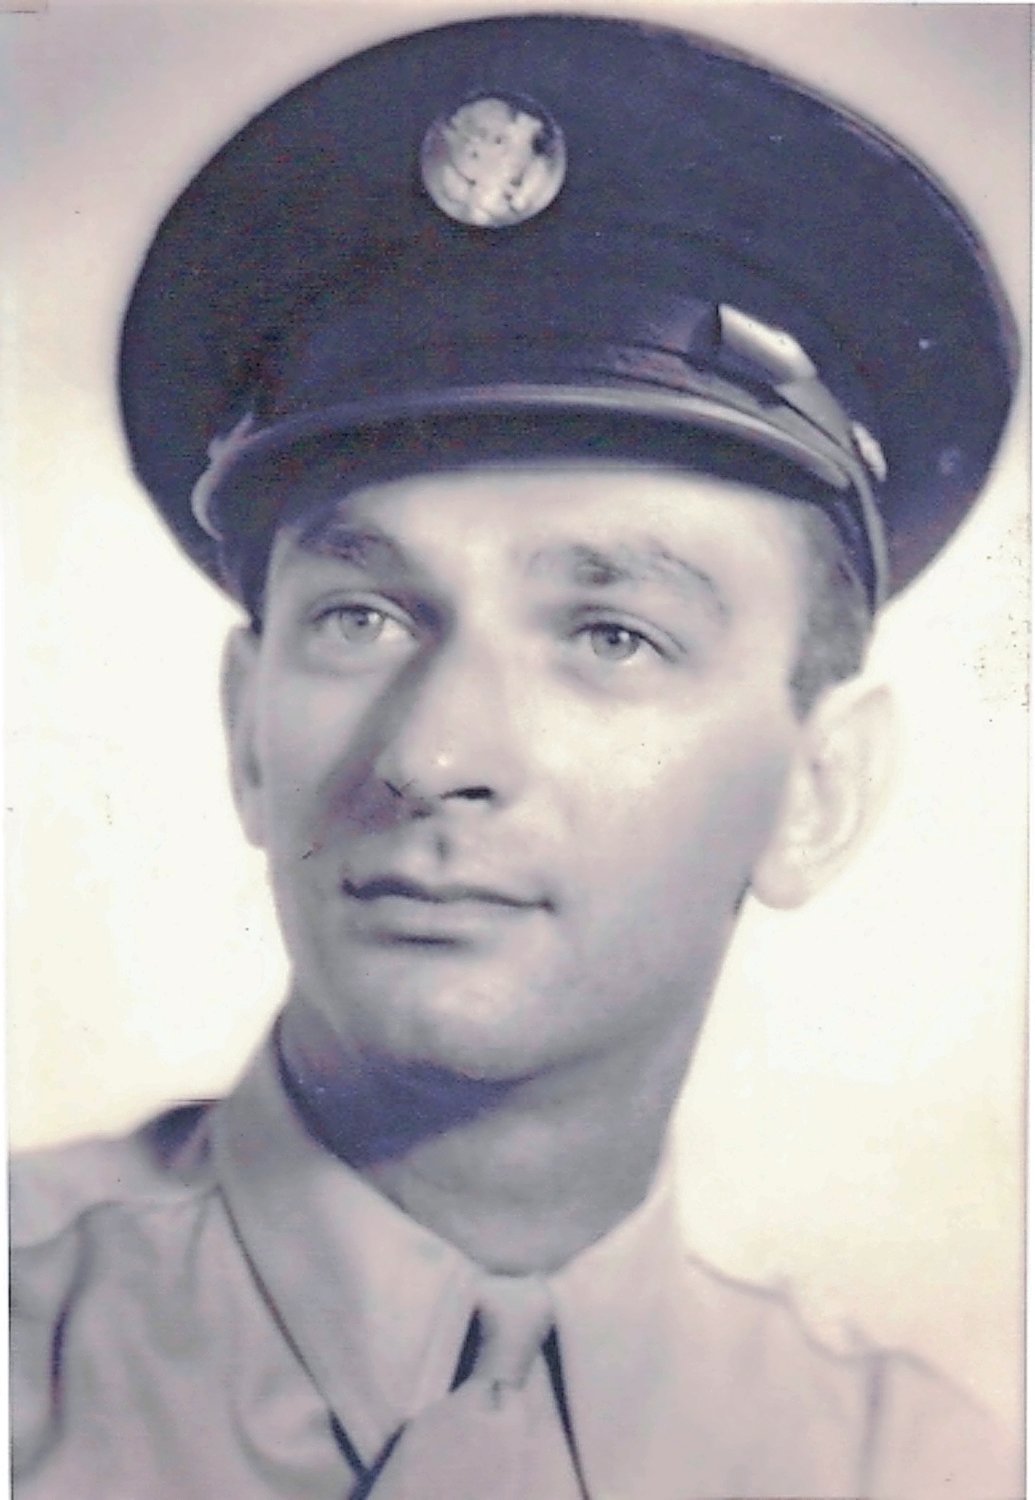 Nemser served in World War II as a cryptographer and cryptanalyst in the Army Air Corps.